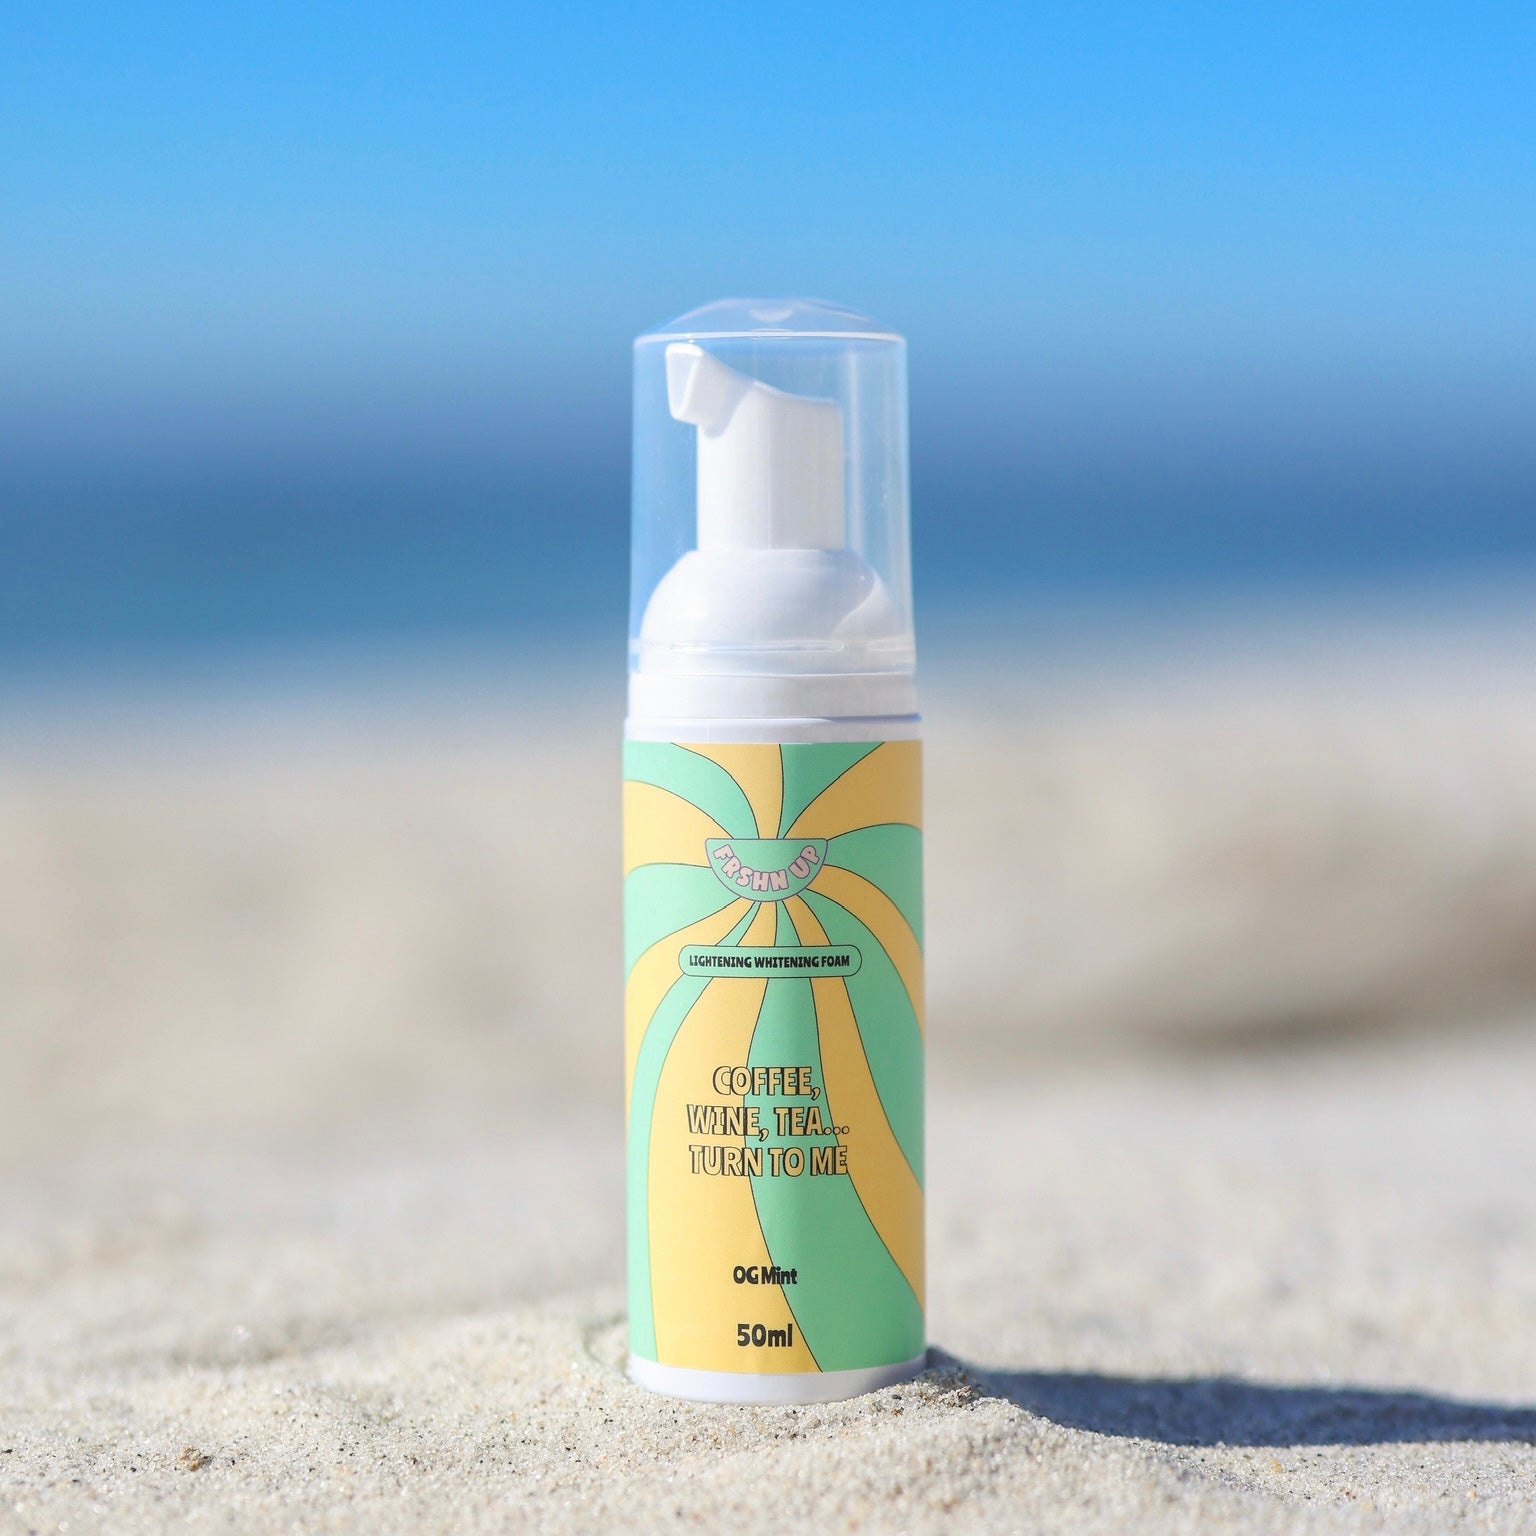 Ultimate Lightening Whitening Vault sunscreen lotion by FRSHN UP on a sandy beach with a radiant smile in the background.